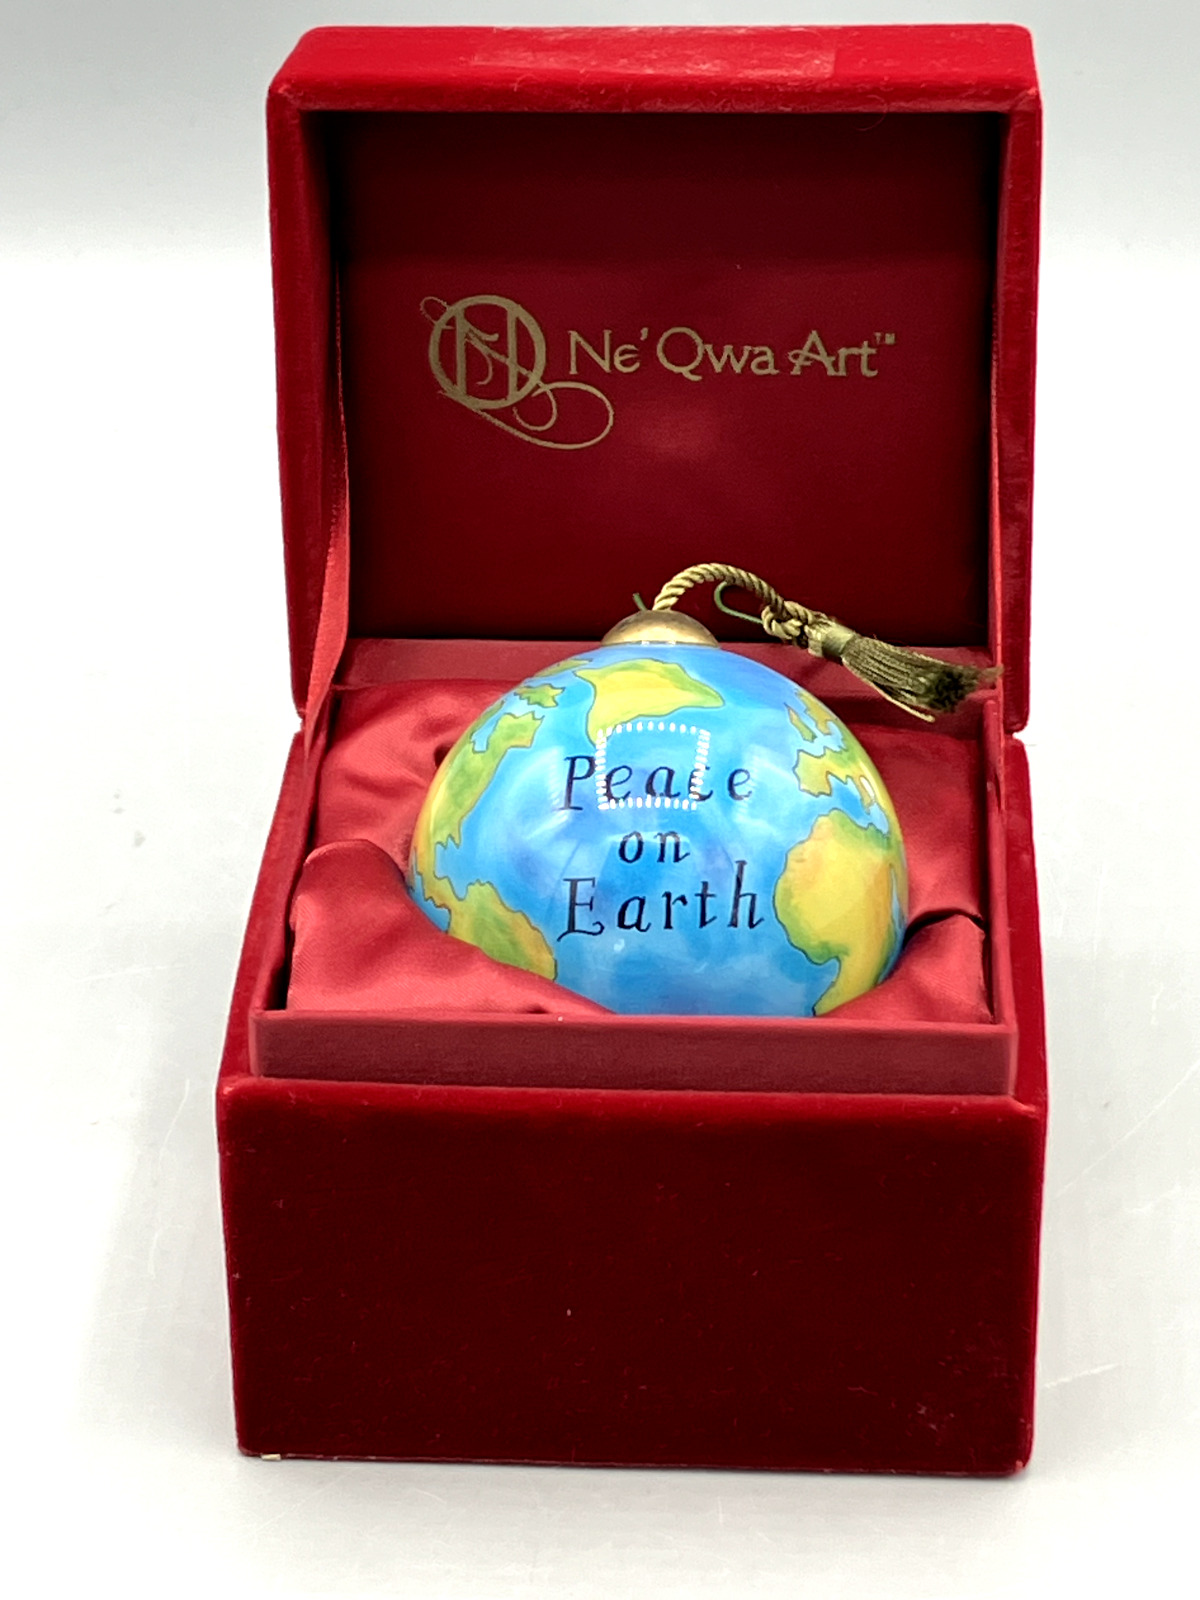 Ne\' Qwa Art Peace on Earth by Susan Winget Glass Ornament Reverse Hand Painting